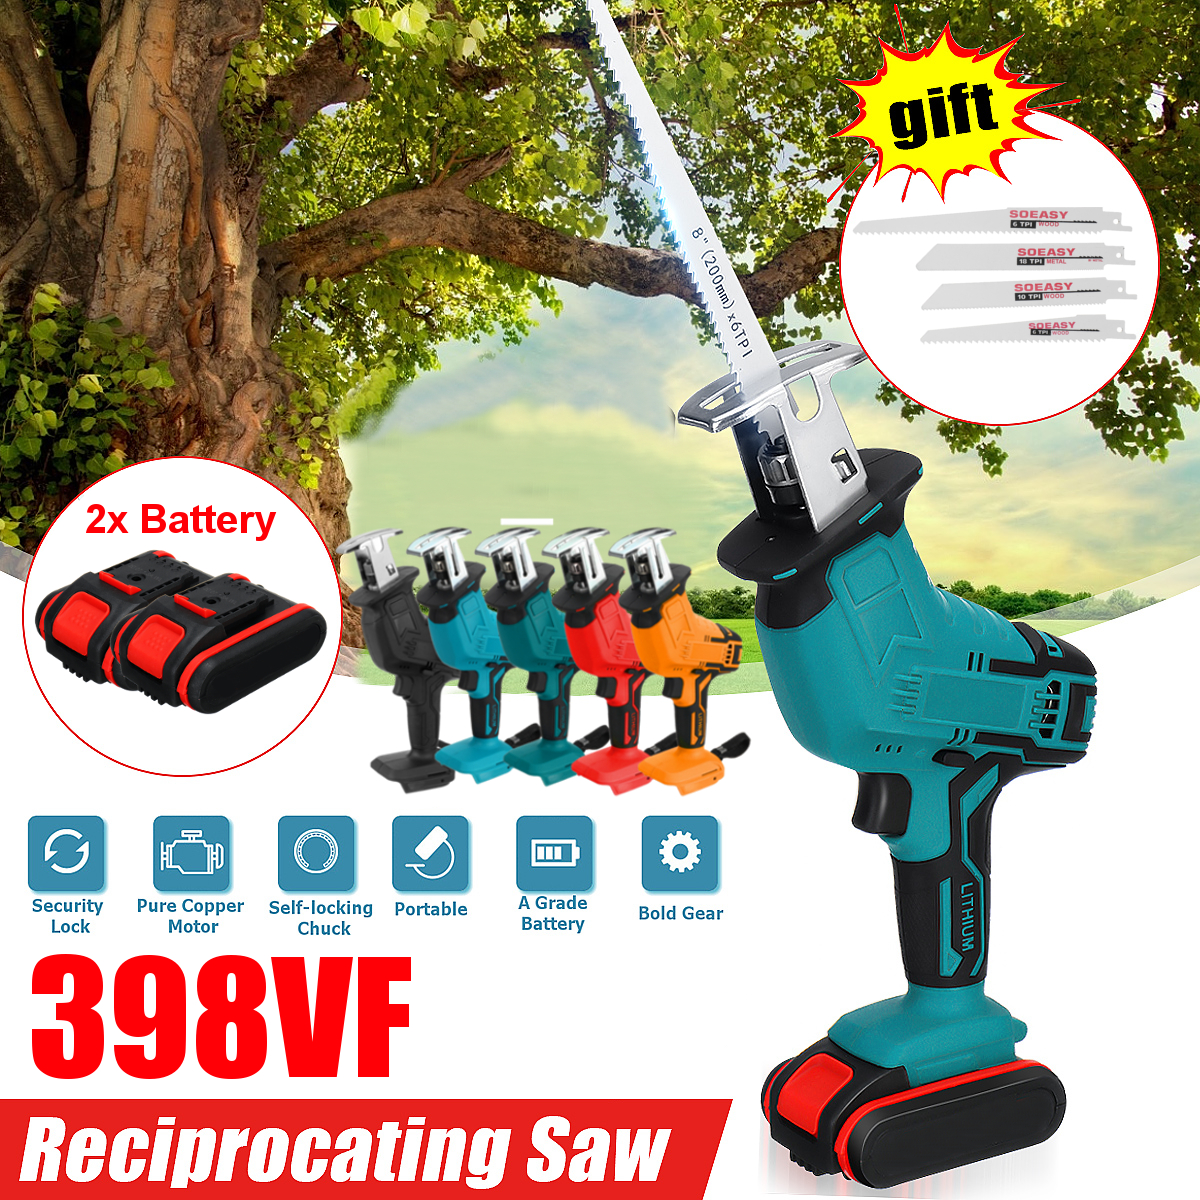 398VF-Reciprocating-Saw-Variable-Speed-Cordless-Electric-Saw-w-2-Batteries--4-Blades-Wood-Metal-Plas-1874646-2